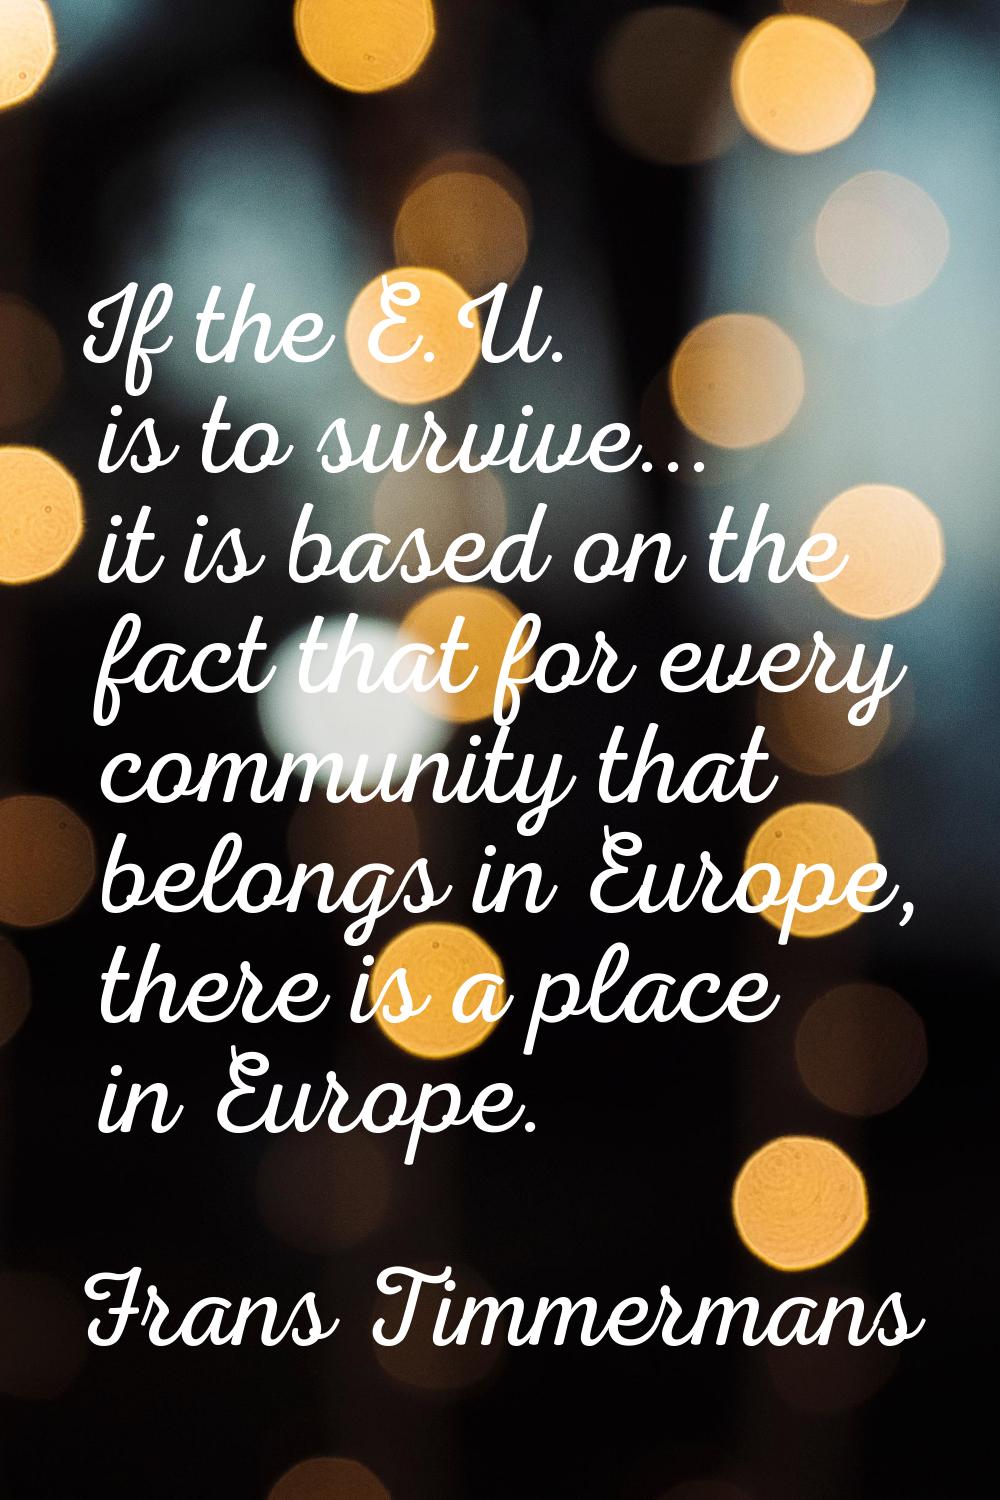 If the E.U. is to survive... it is based on the fact that for every community that belongs in Europ